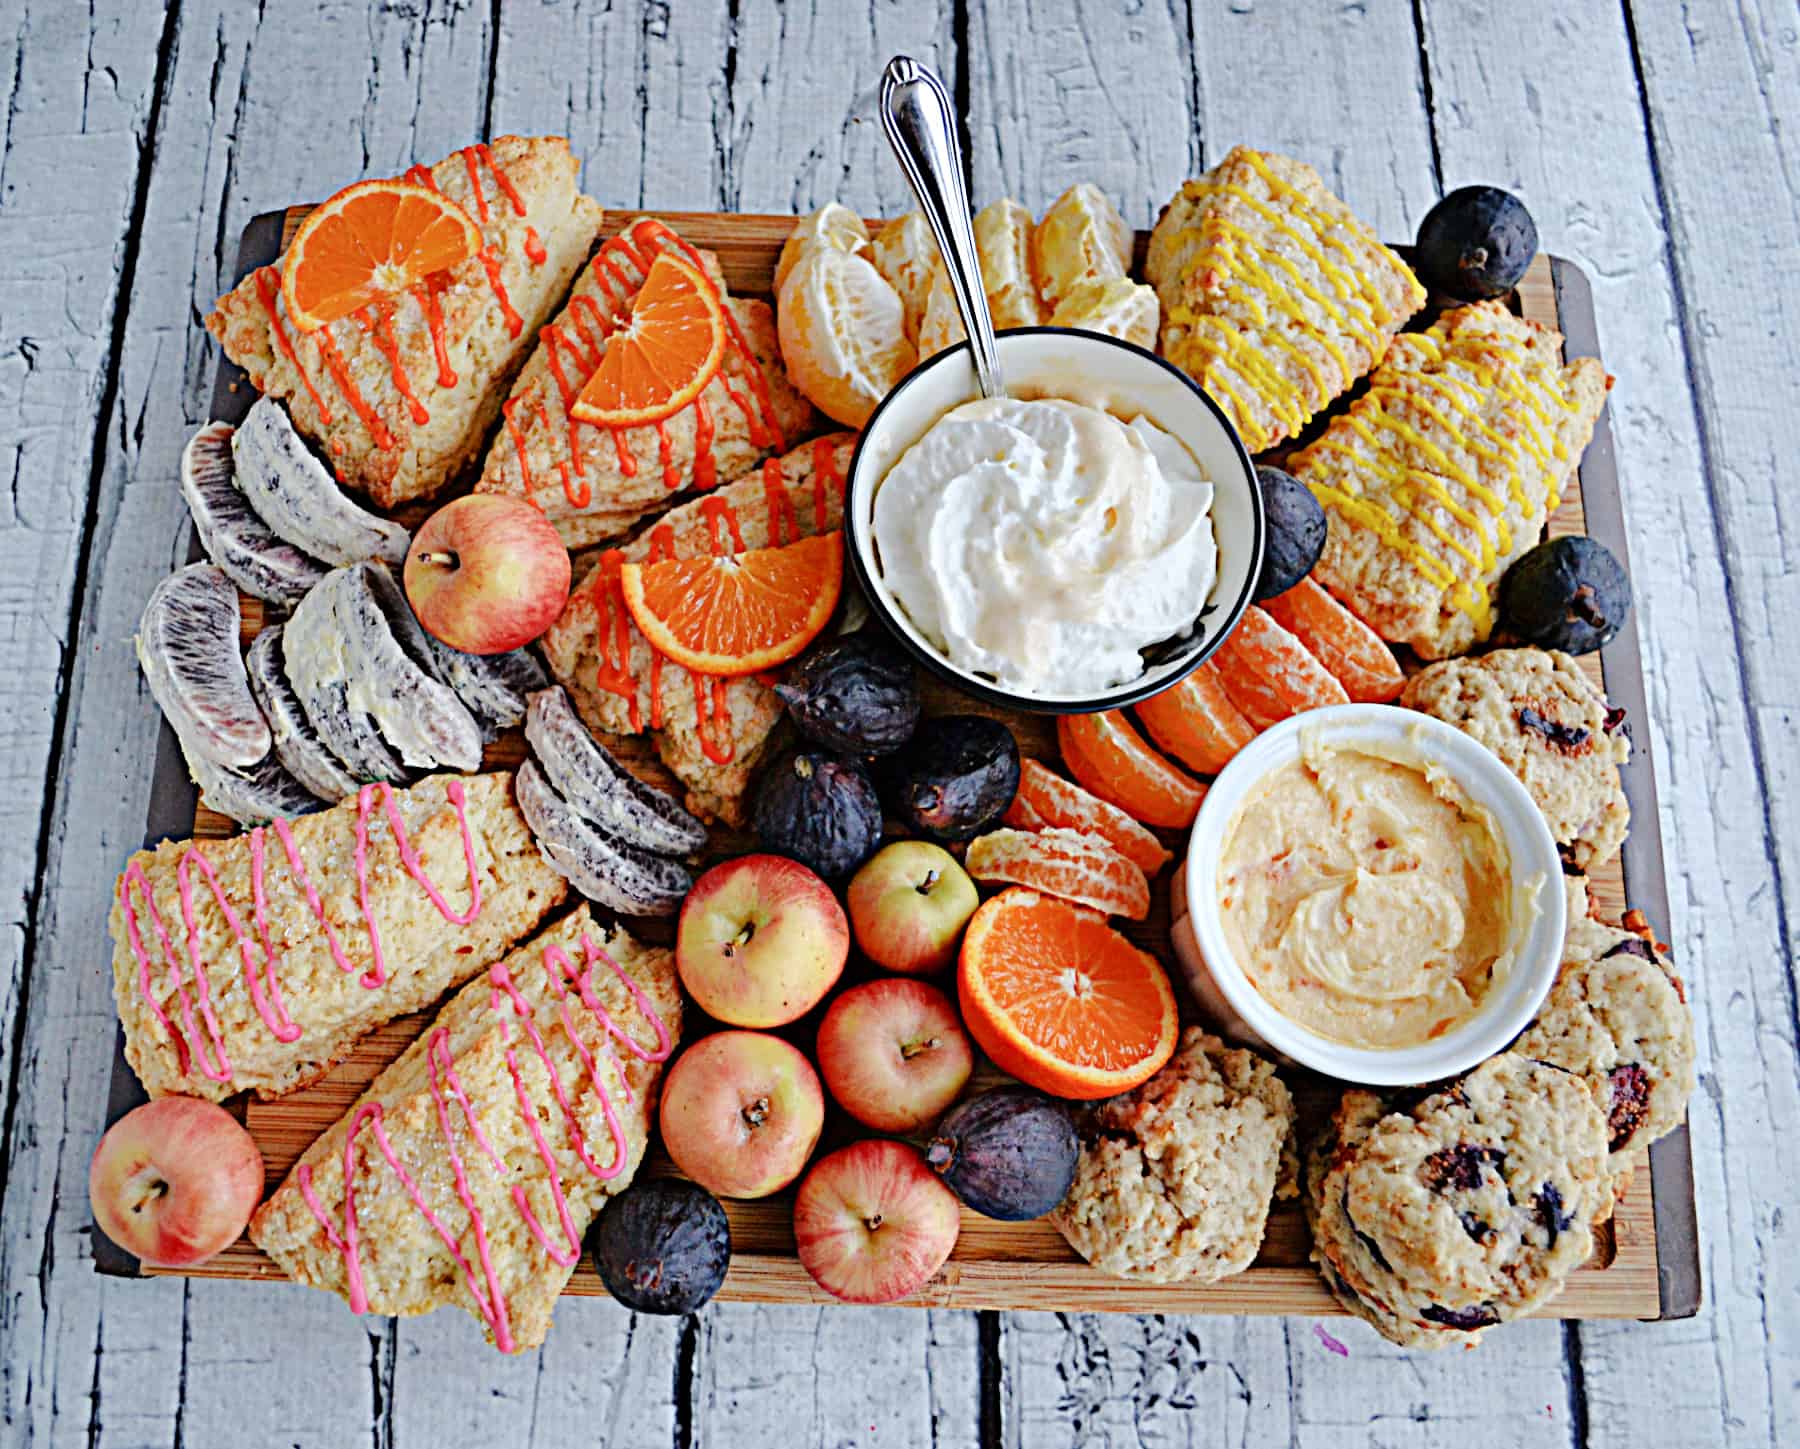 A breakfast board with scones, fresh fruits, and spreads.